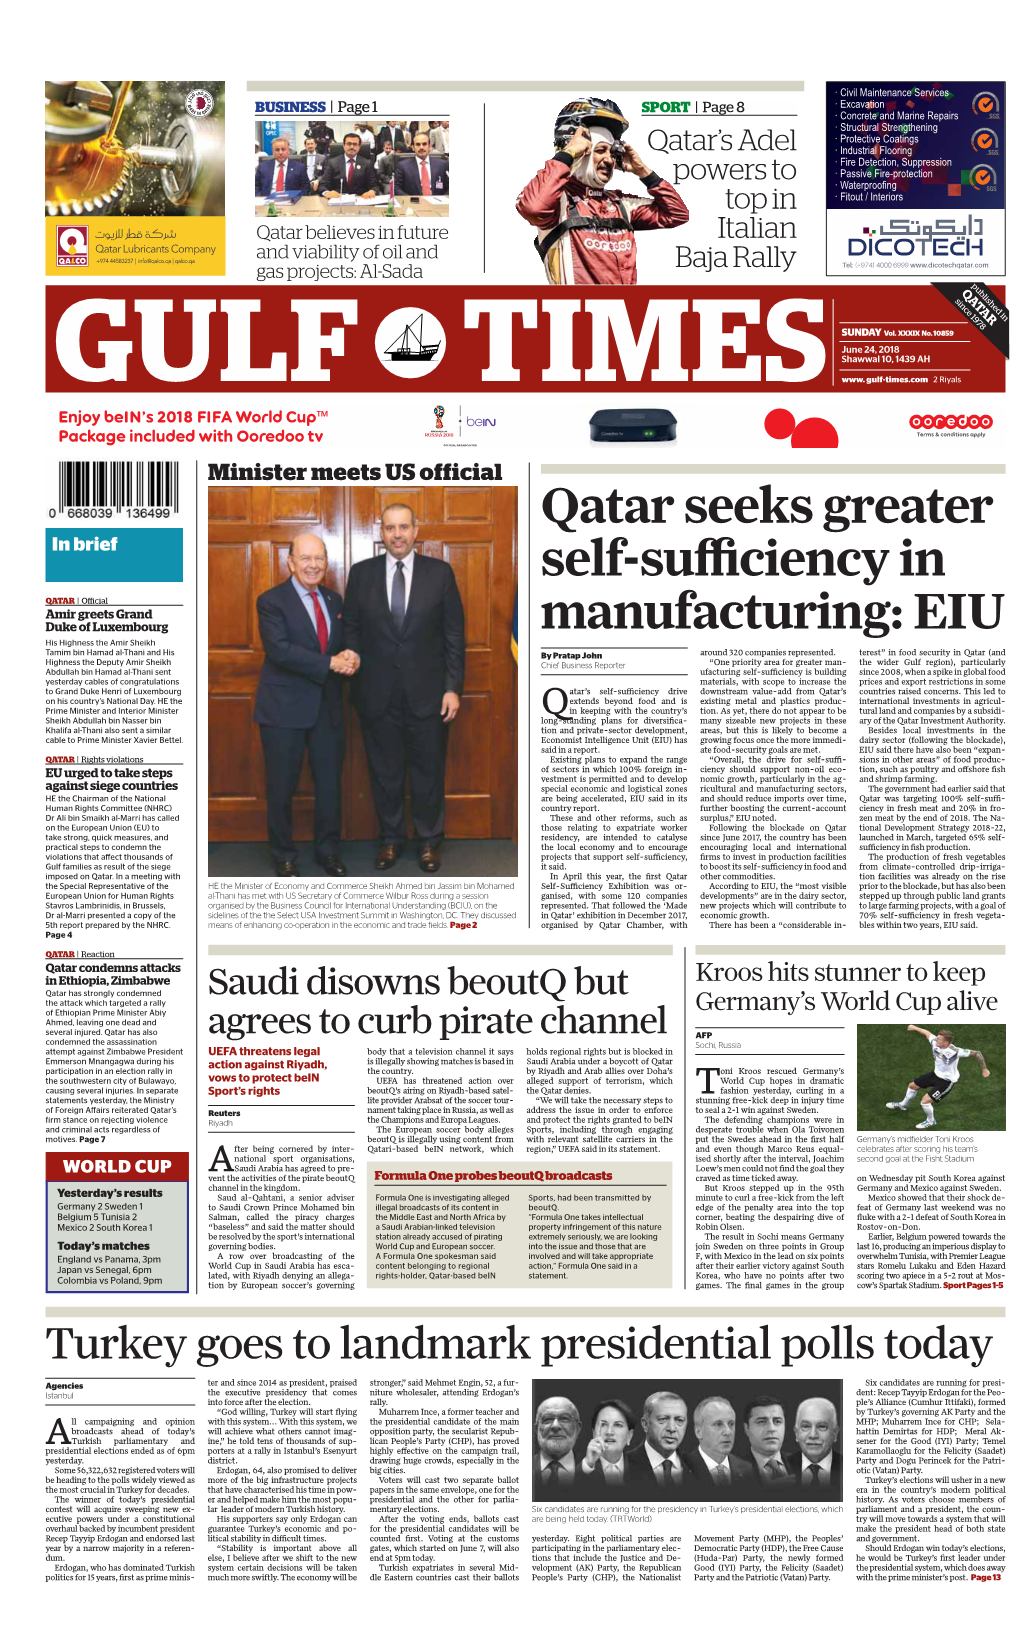 Qatar Seeks Greater Self-Sufficiency in Manufacturing